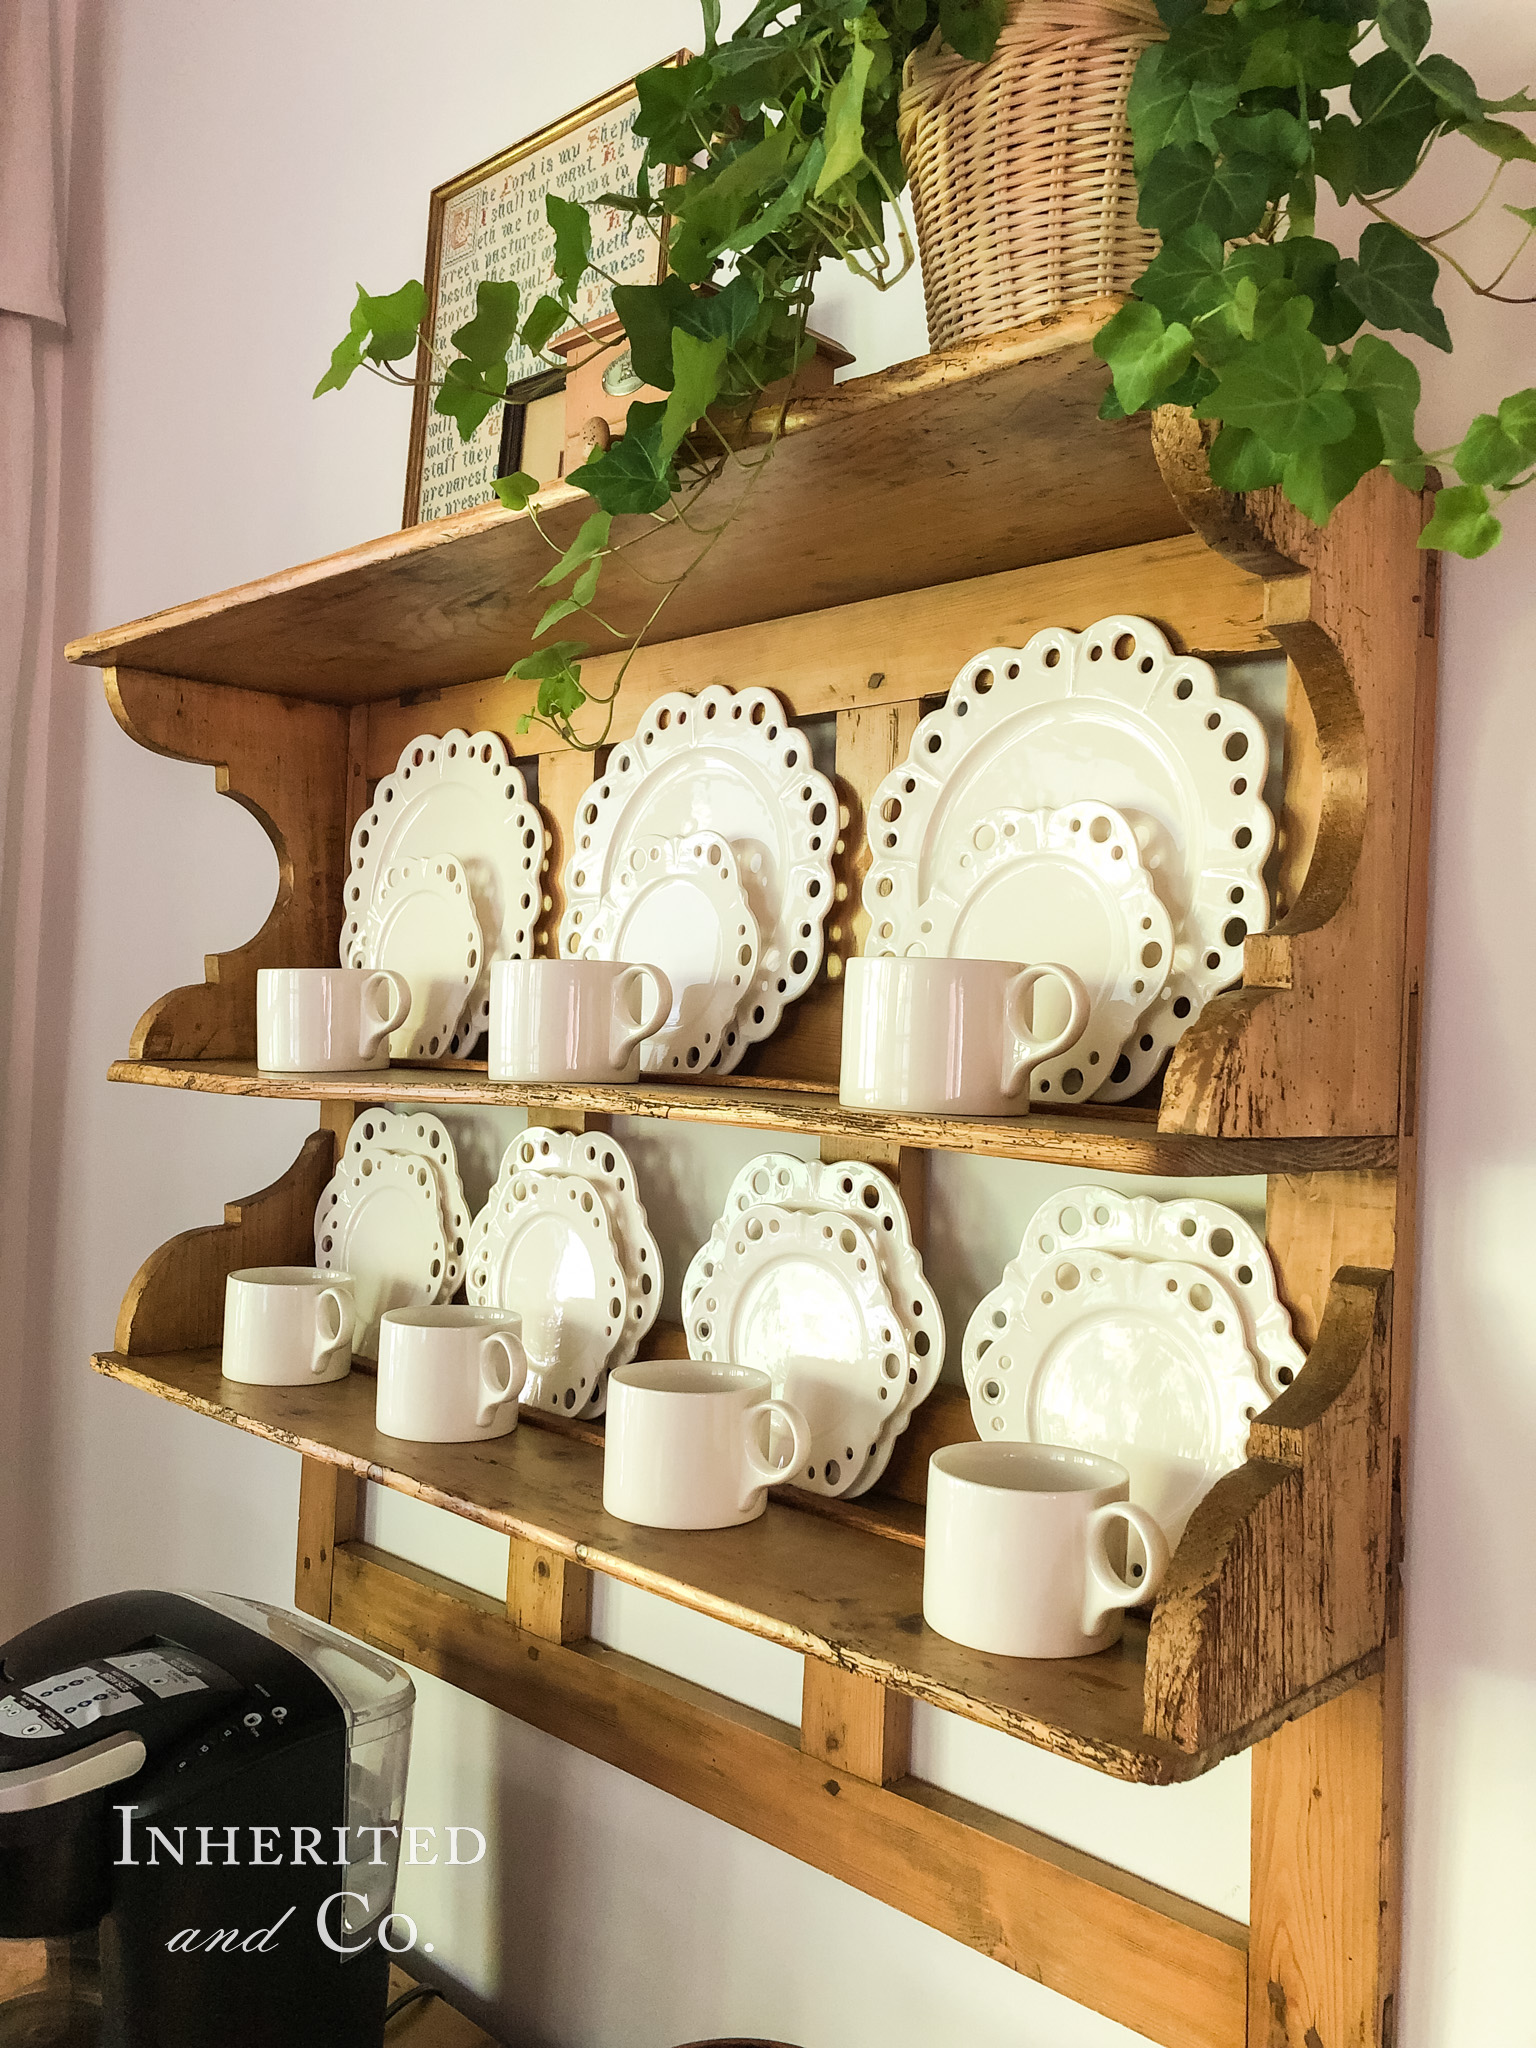 Eyelet plates and mugs on an antique English pine plate rack